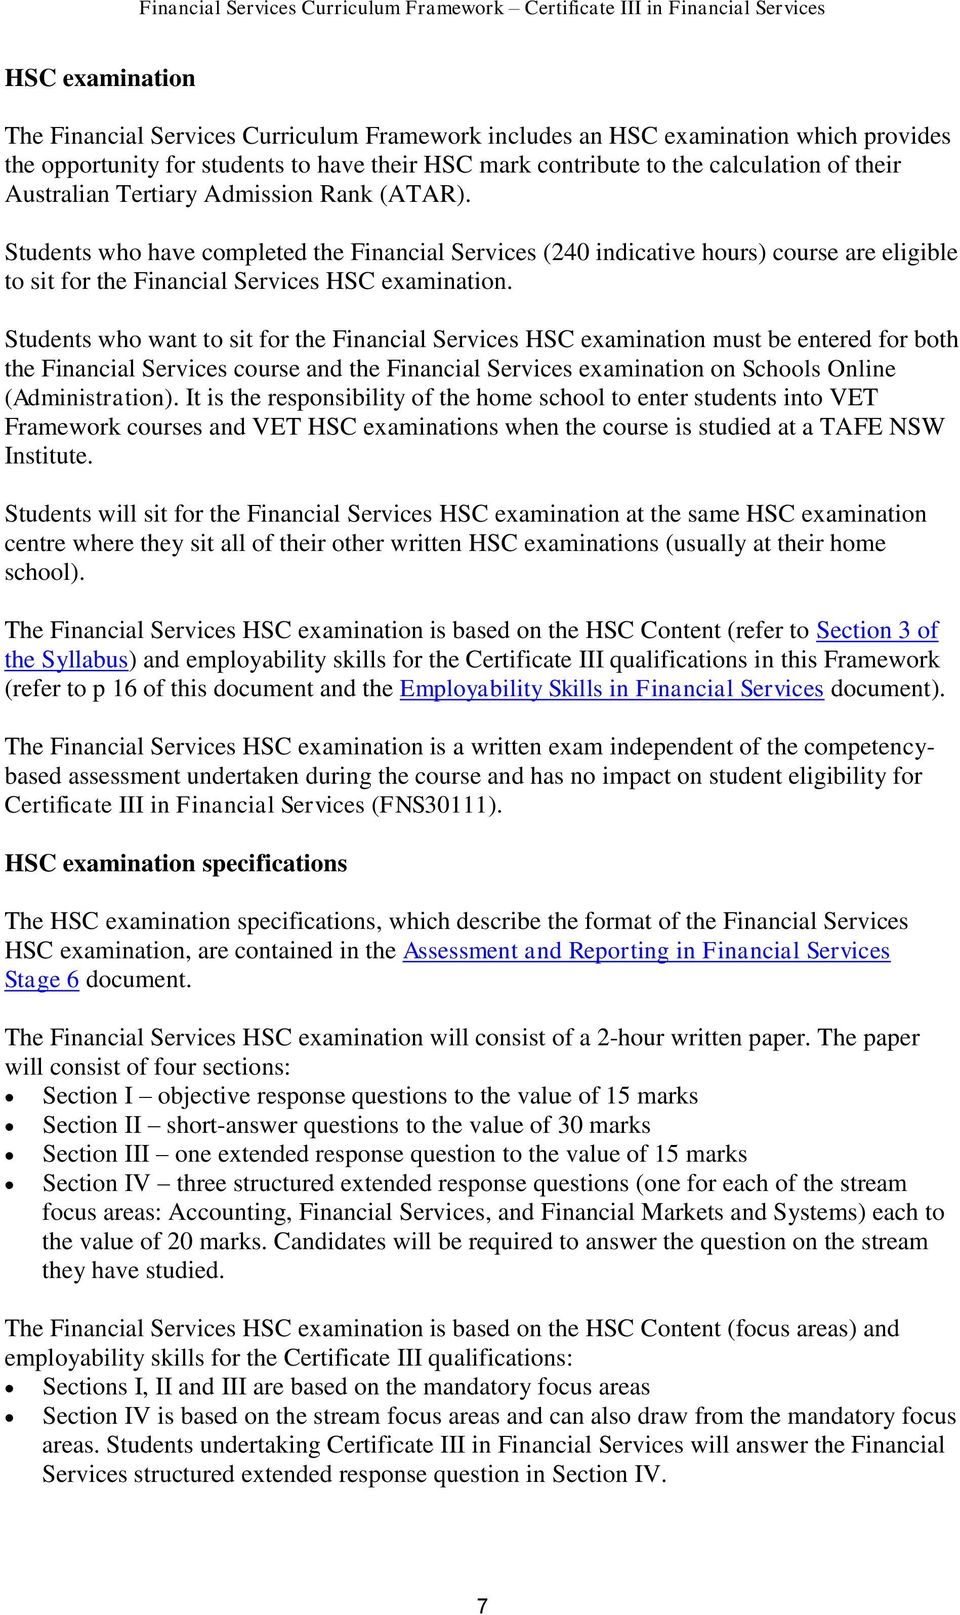 Students who want to sit for the Financial Services HSC examination must be entered for both the Financial Services course and the Financial Services examination on Schools Online (Administration).